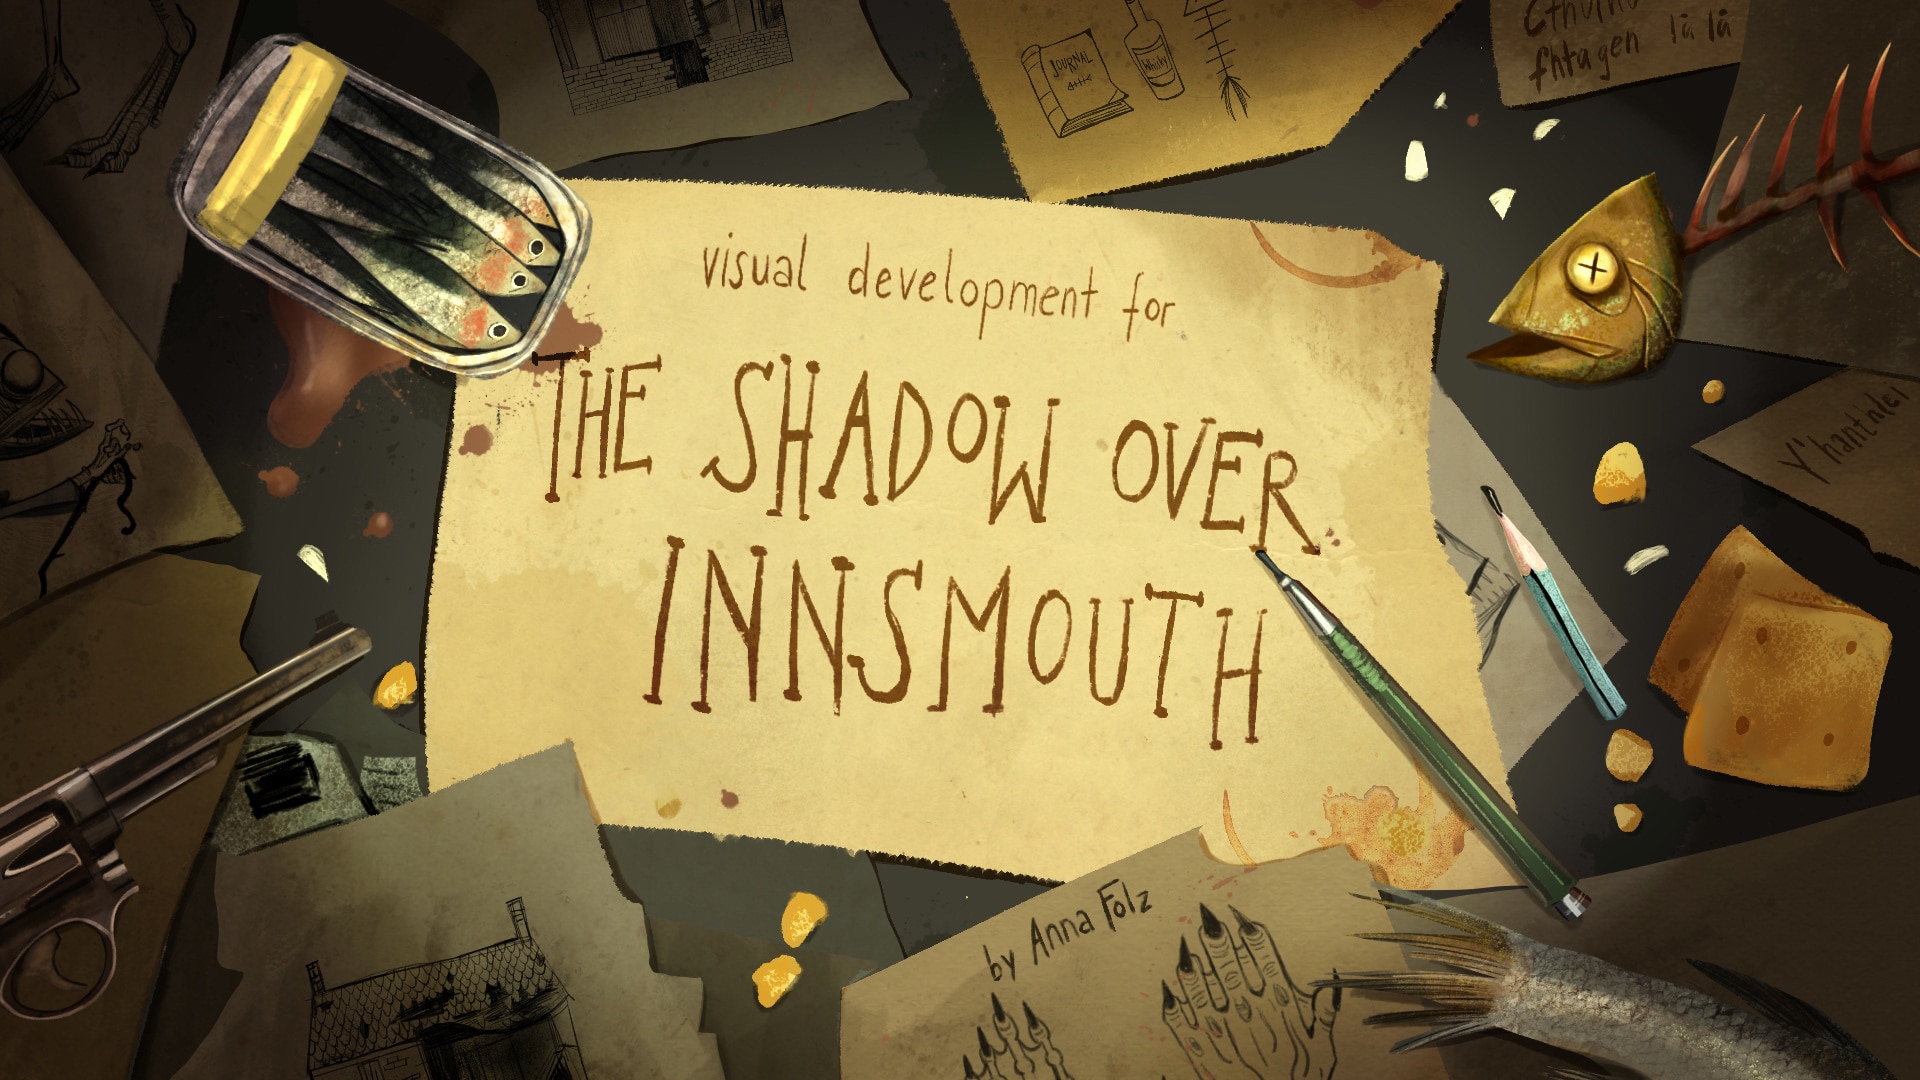 The Shadow over Innsmouth